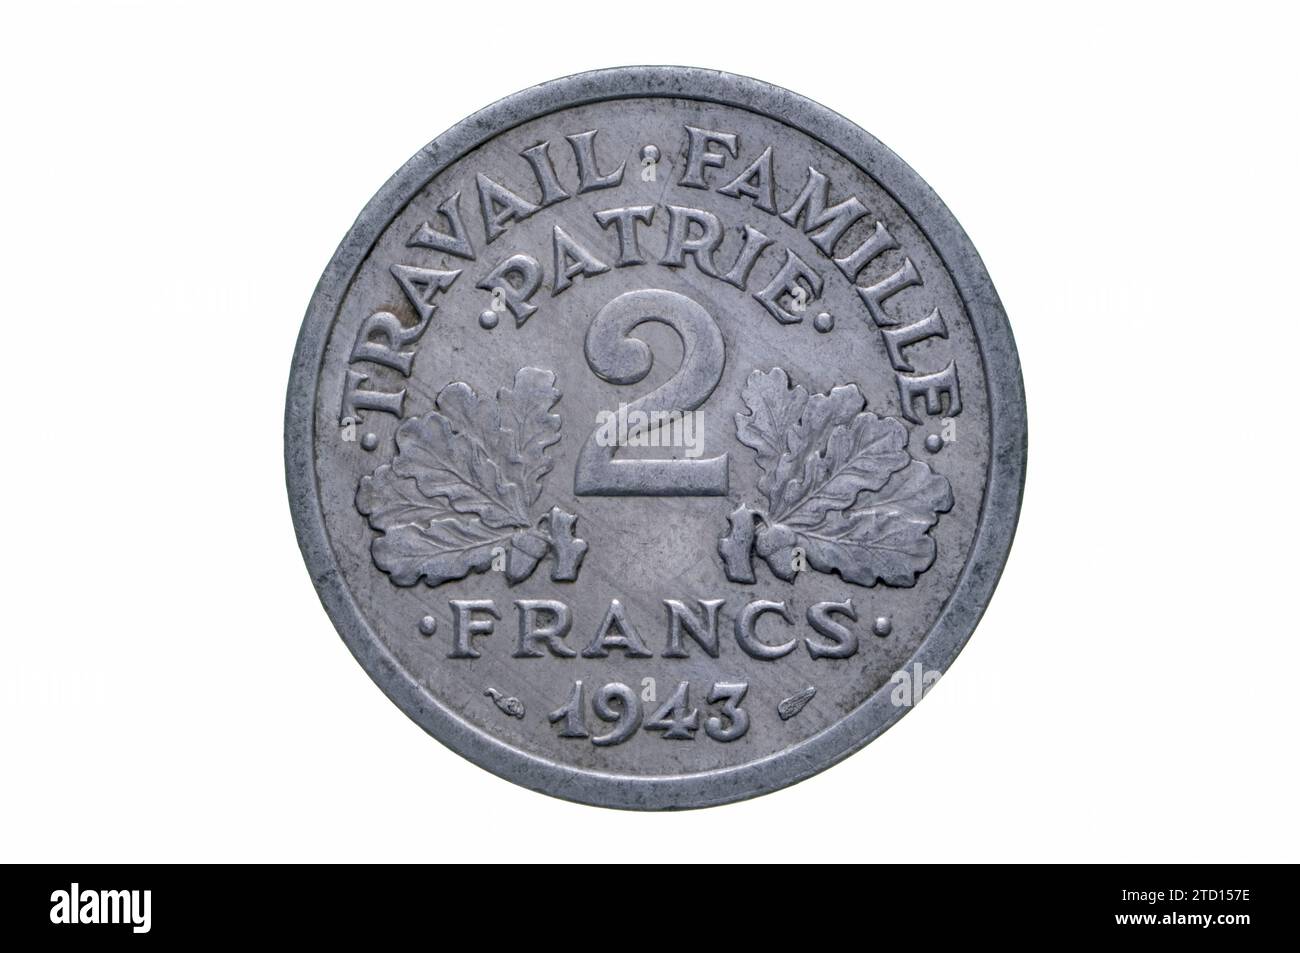 Vichy French State 2 Franc Coin Stock Photo